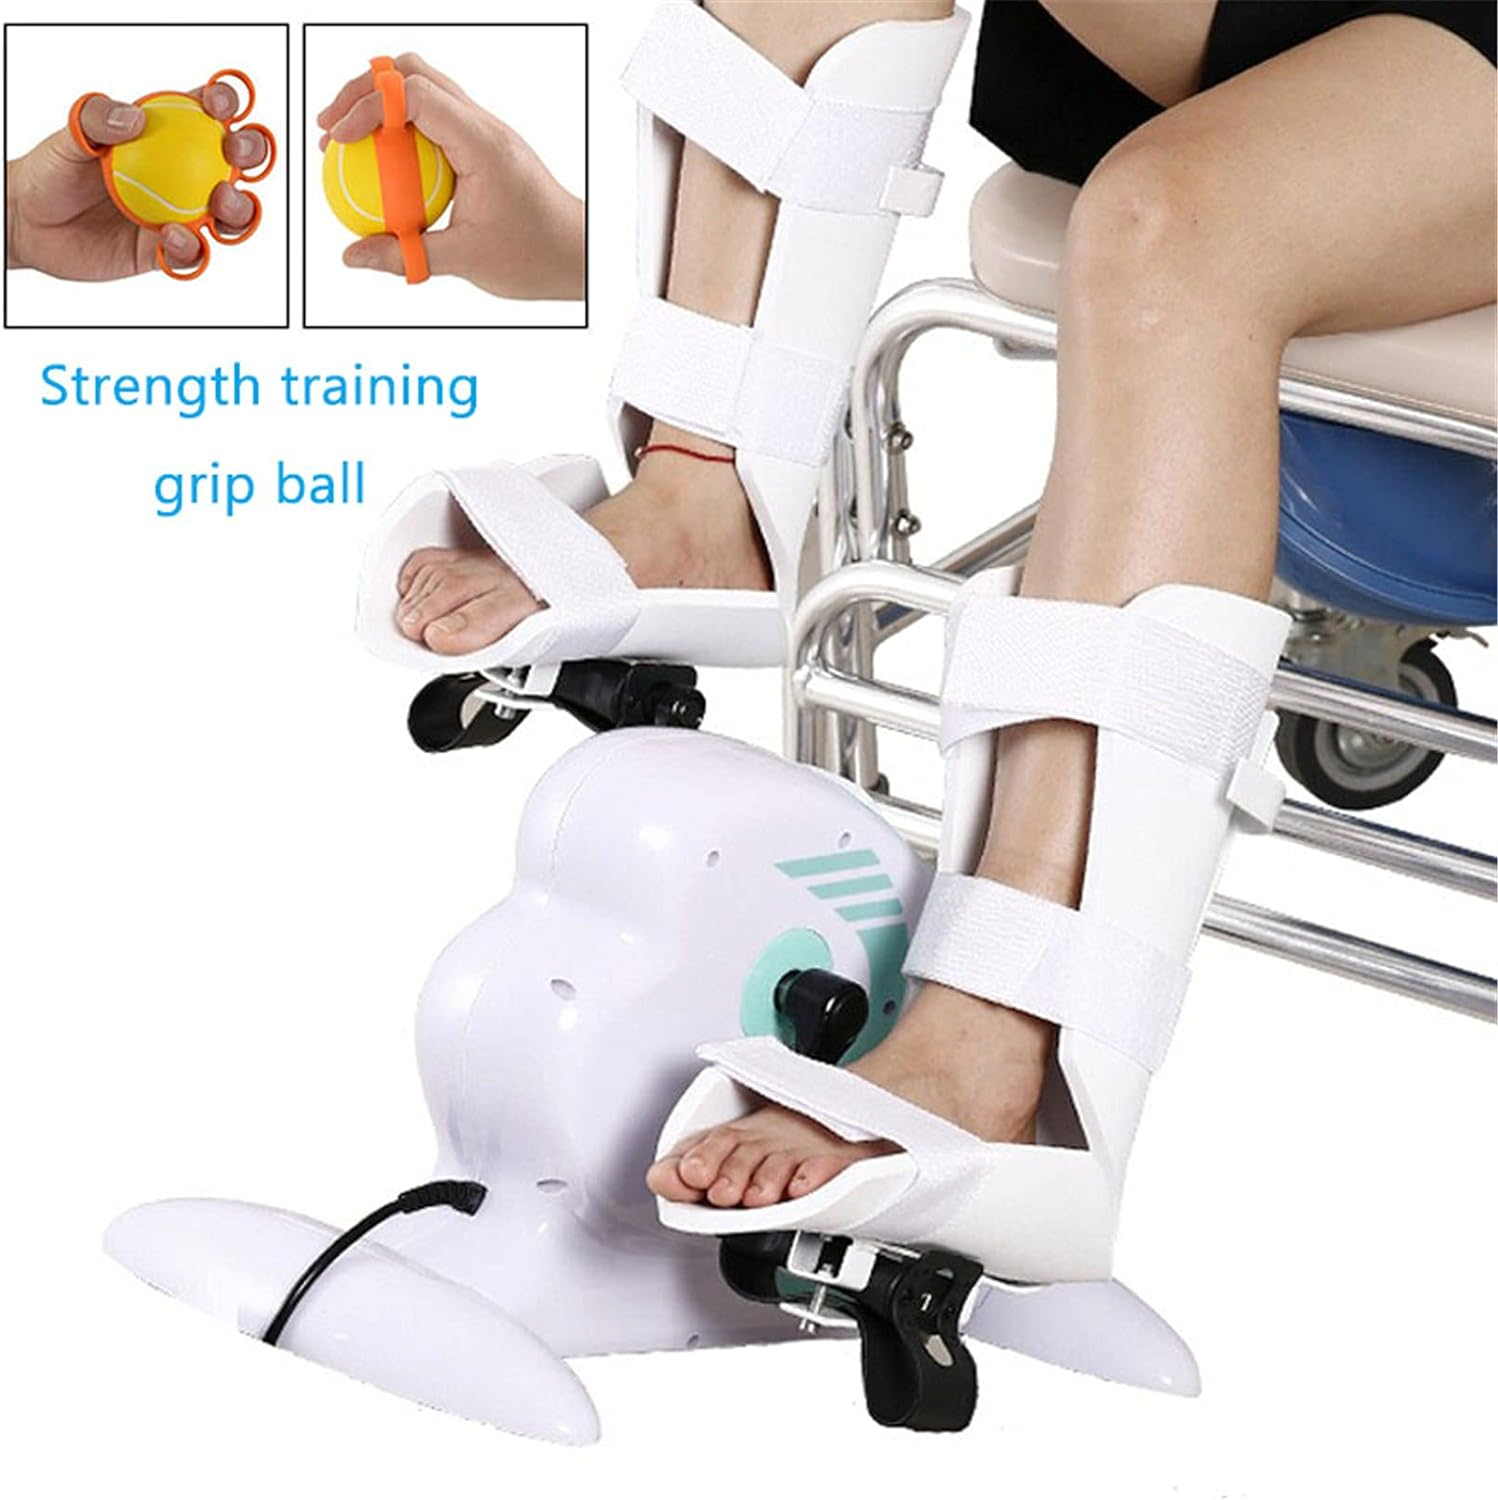 Fitness Motorized Pedal Exercise Bike with Leg Protector  Grip Strength Ball - Electric Pedal Exerciser Physical Therapy Rehab Trainer for Elderly Seniors Handicap Disabled Stroke Survivor